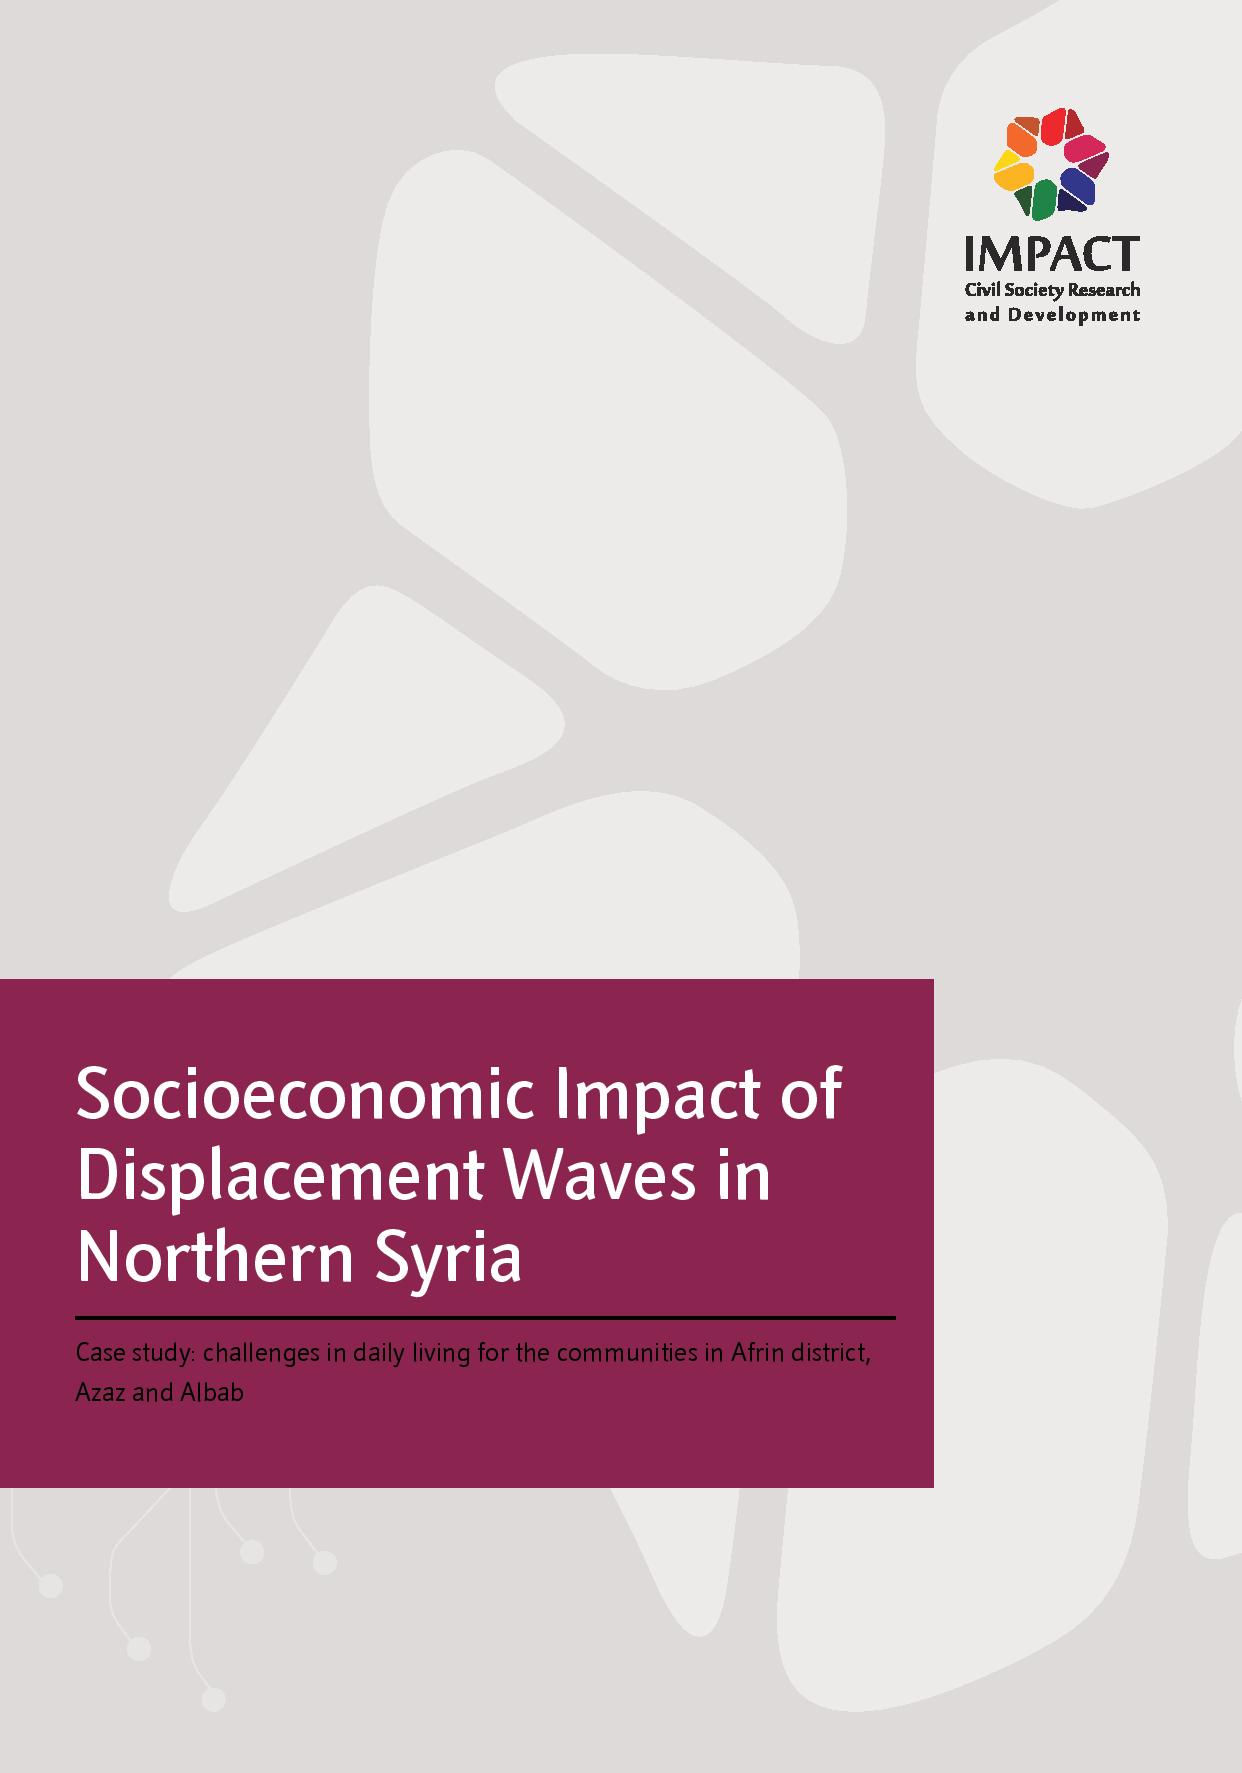 Socioeconomic Impact of Displacement Waves in Northern Syria